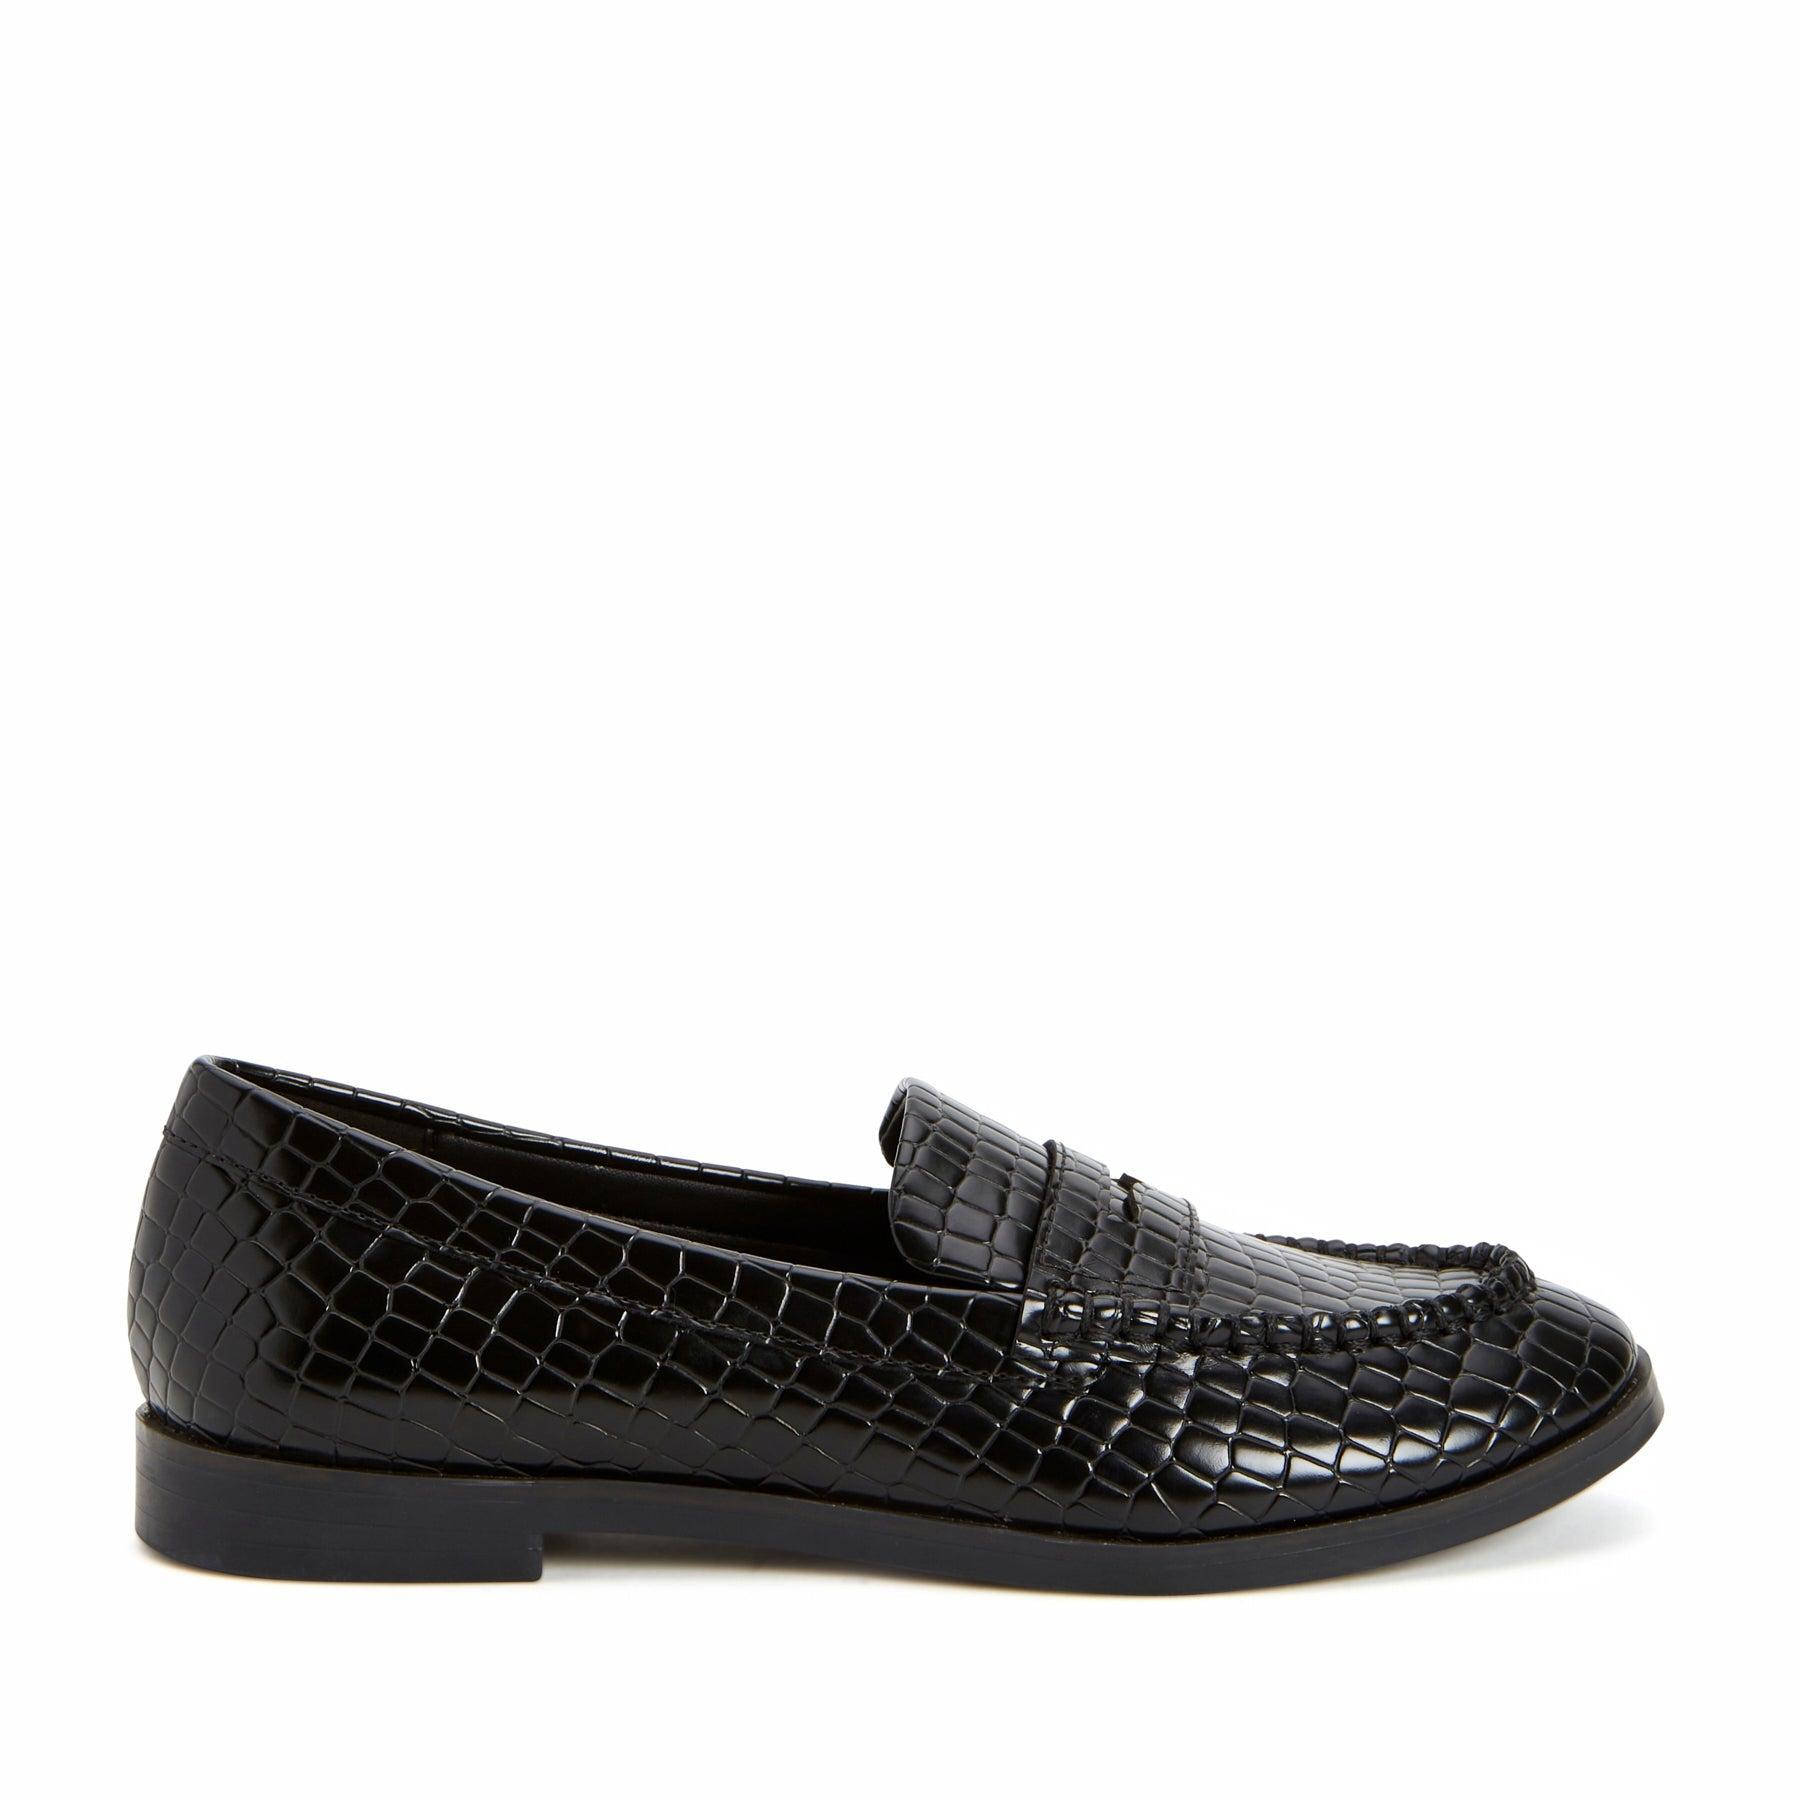 Katy Perry The Geli Loafer in Black | Lyst